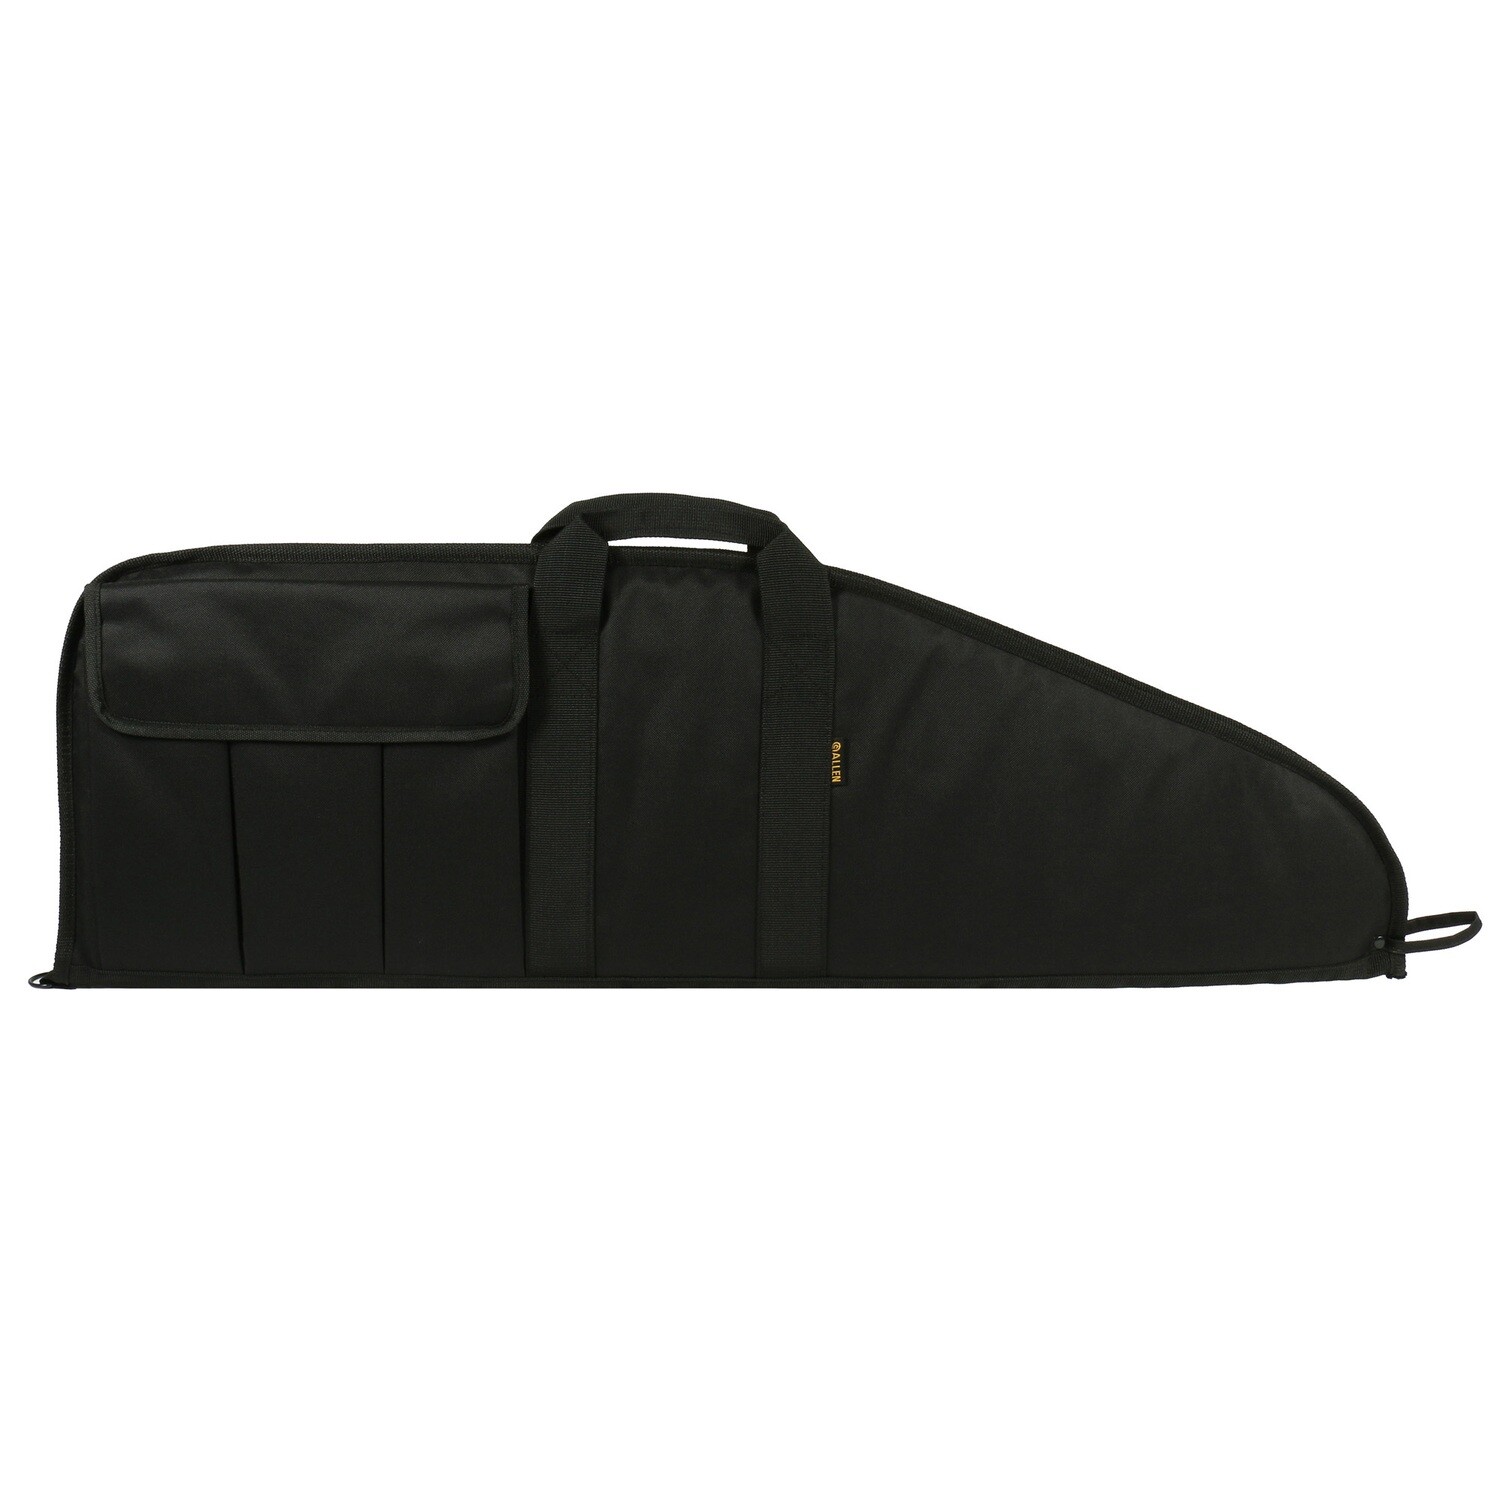 Engage Tactical Rifle Case, 38"